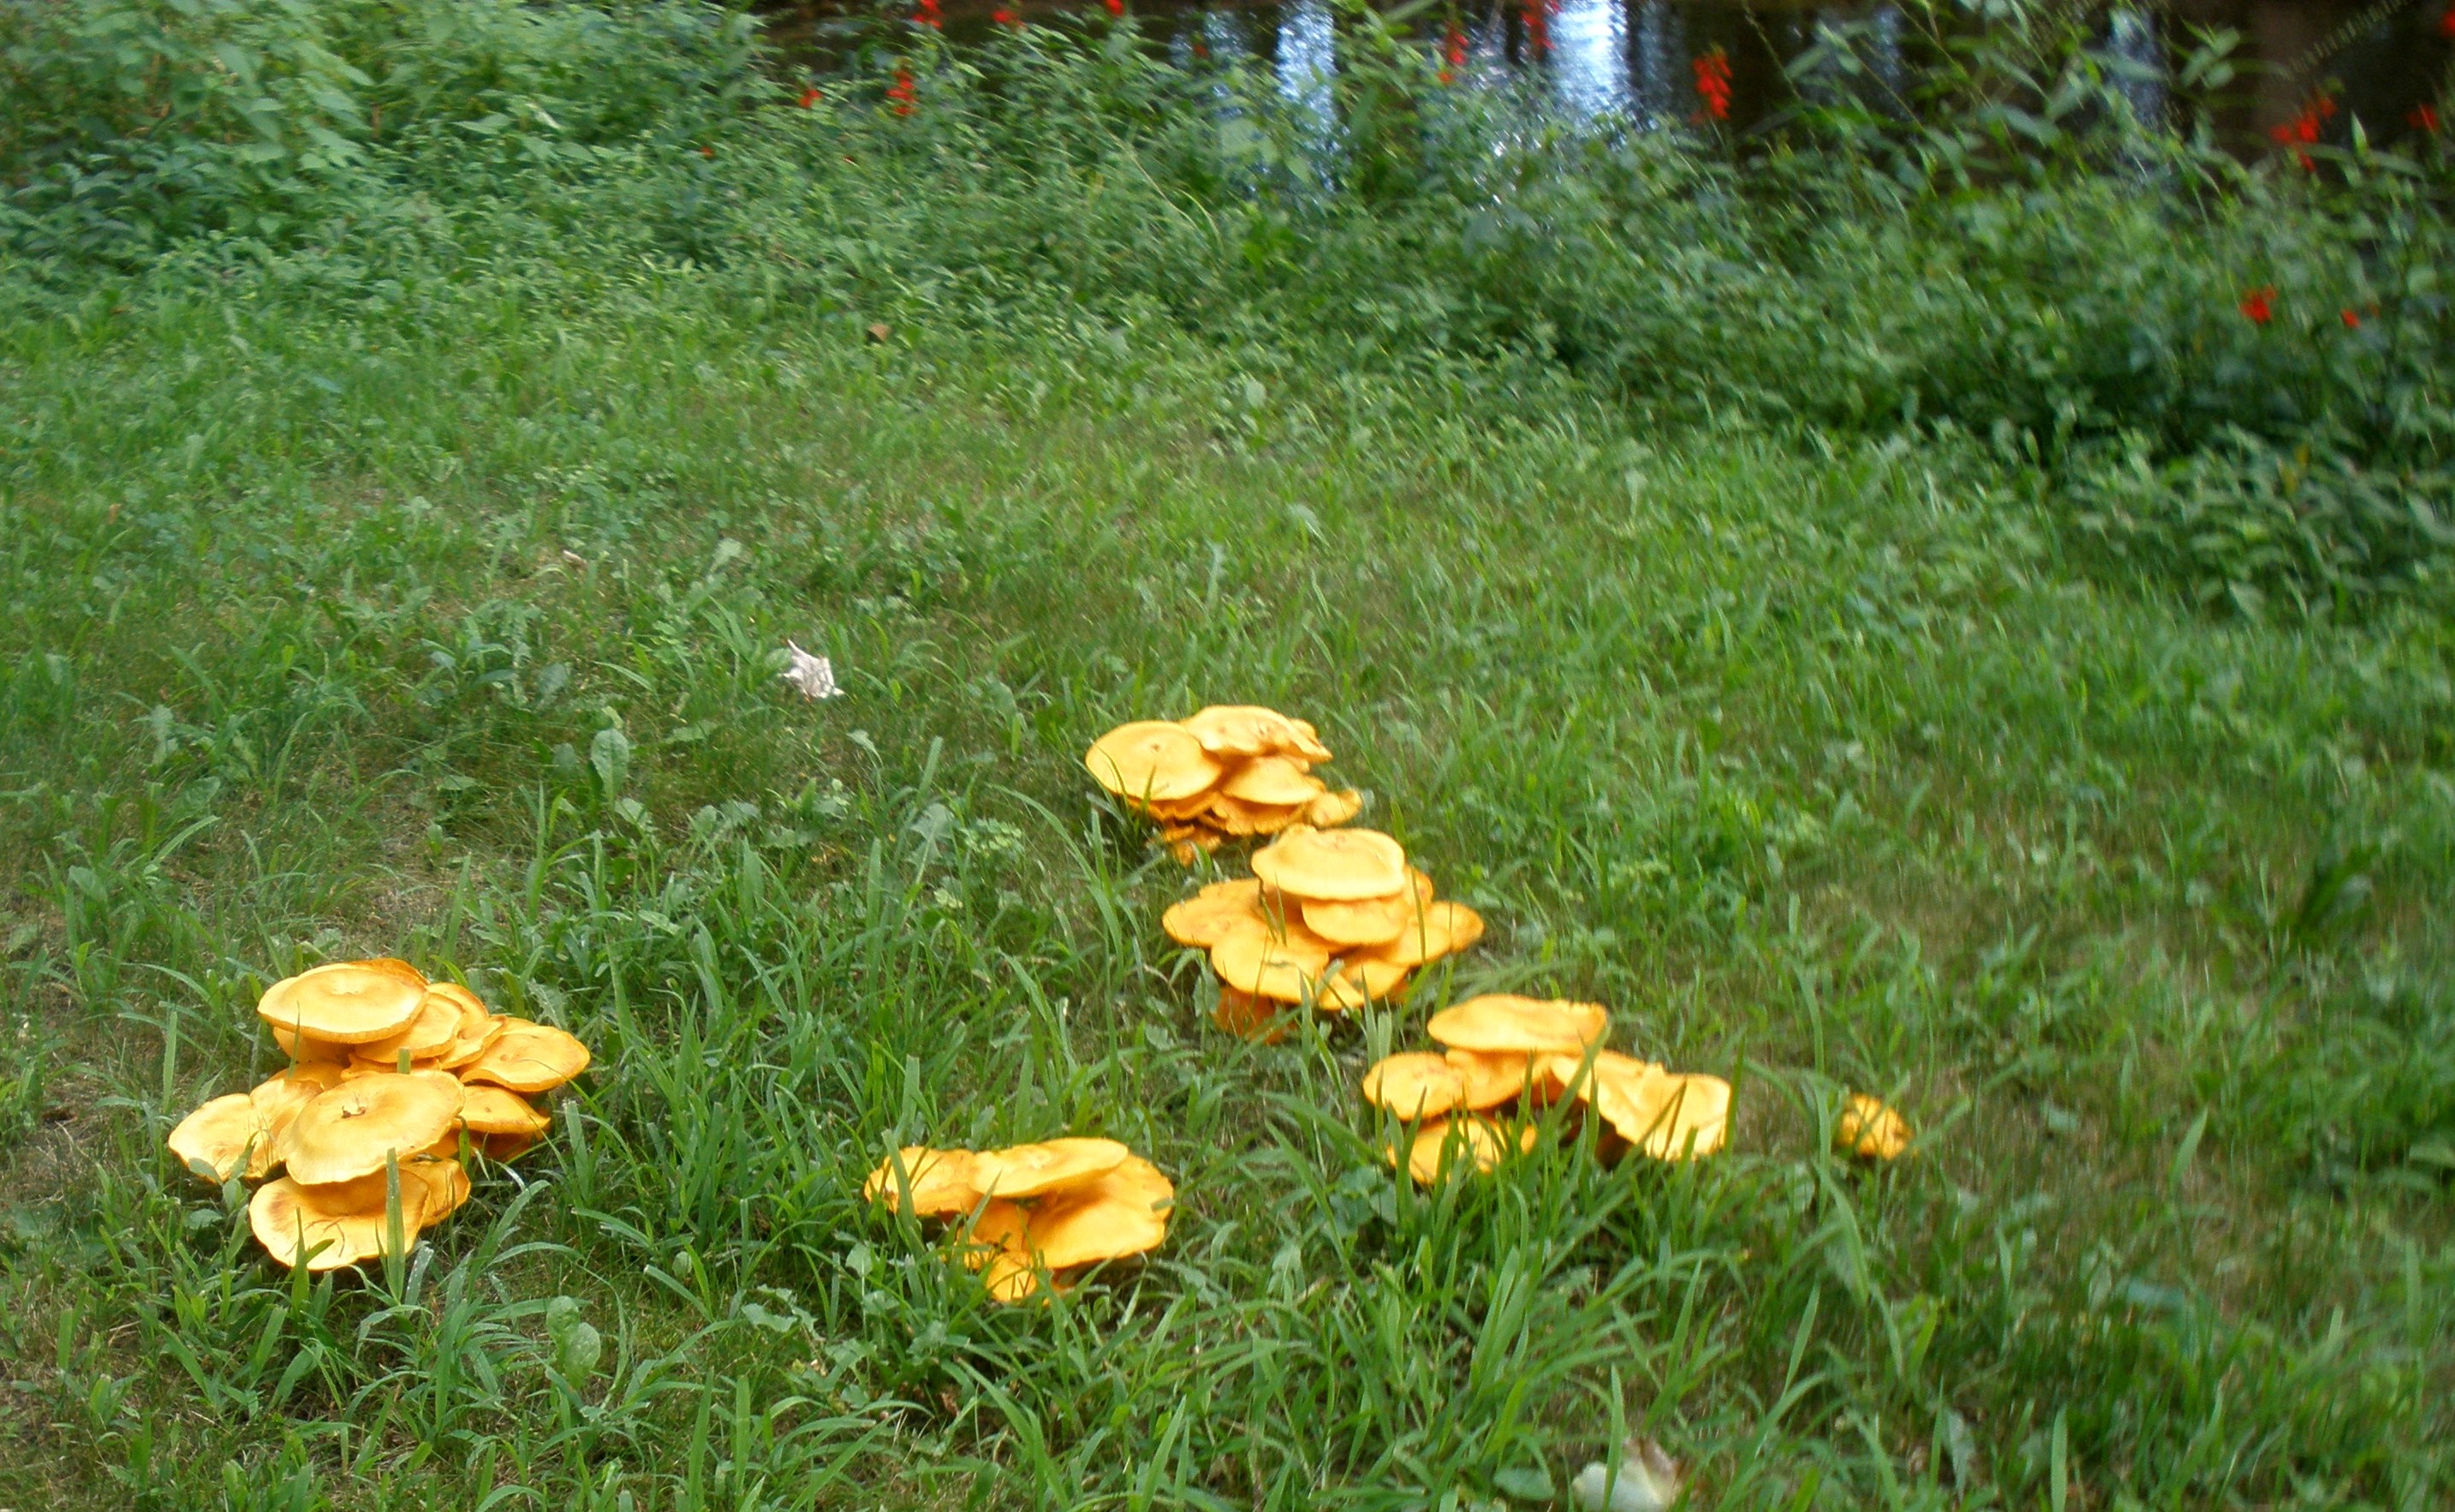 It's August when the fungi bloom